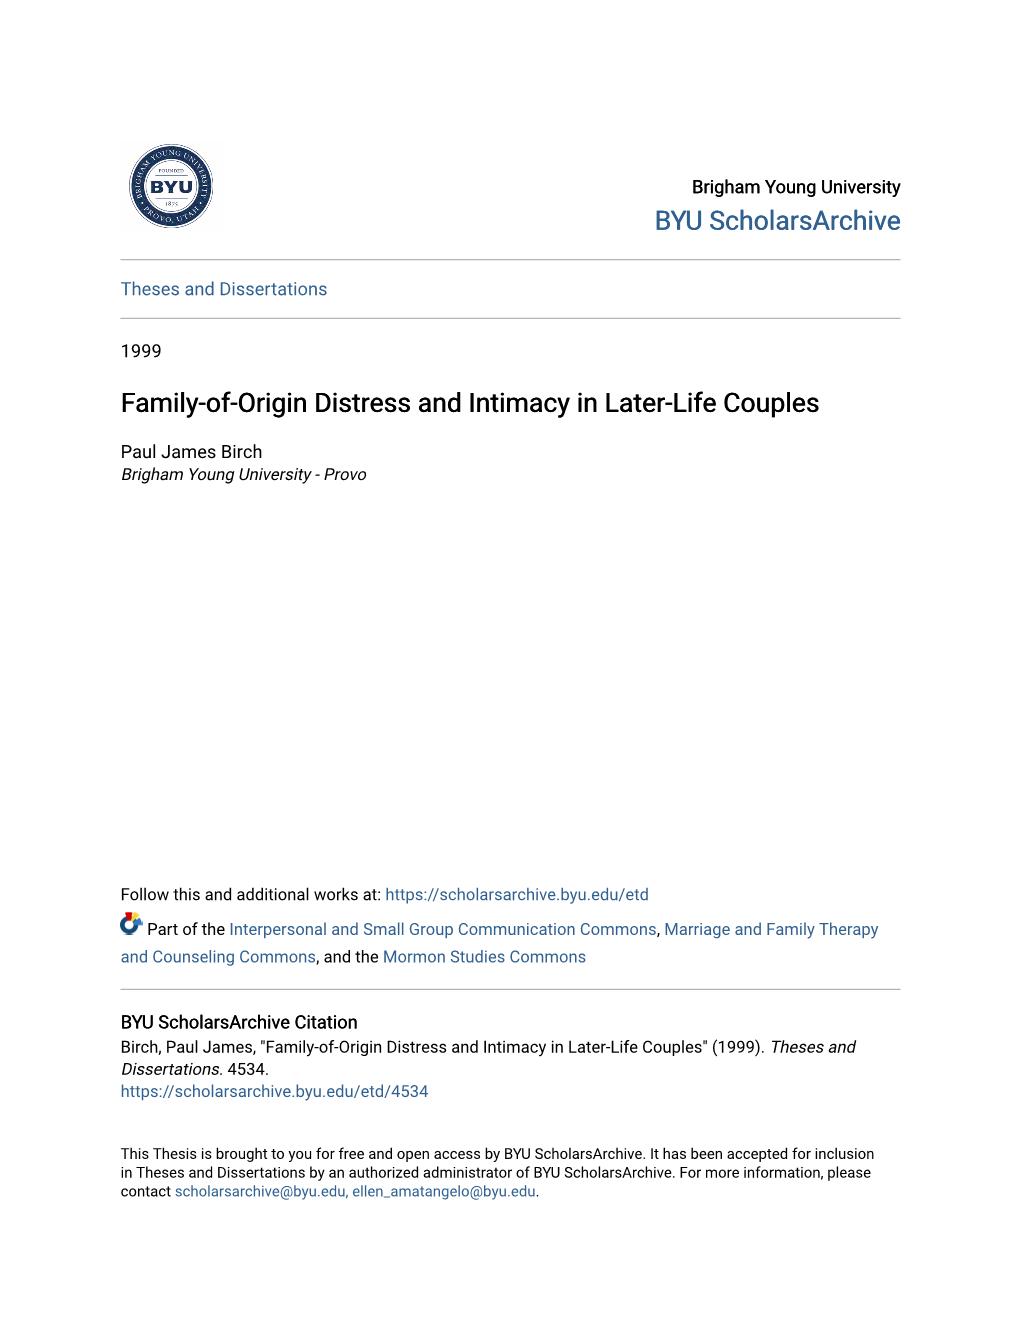 Family-Of-Origin Distress and Intimacy in Later-Life Couples